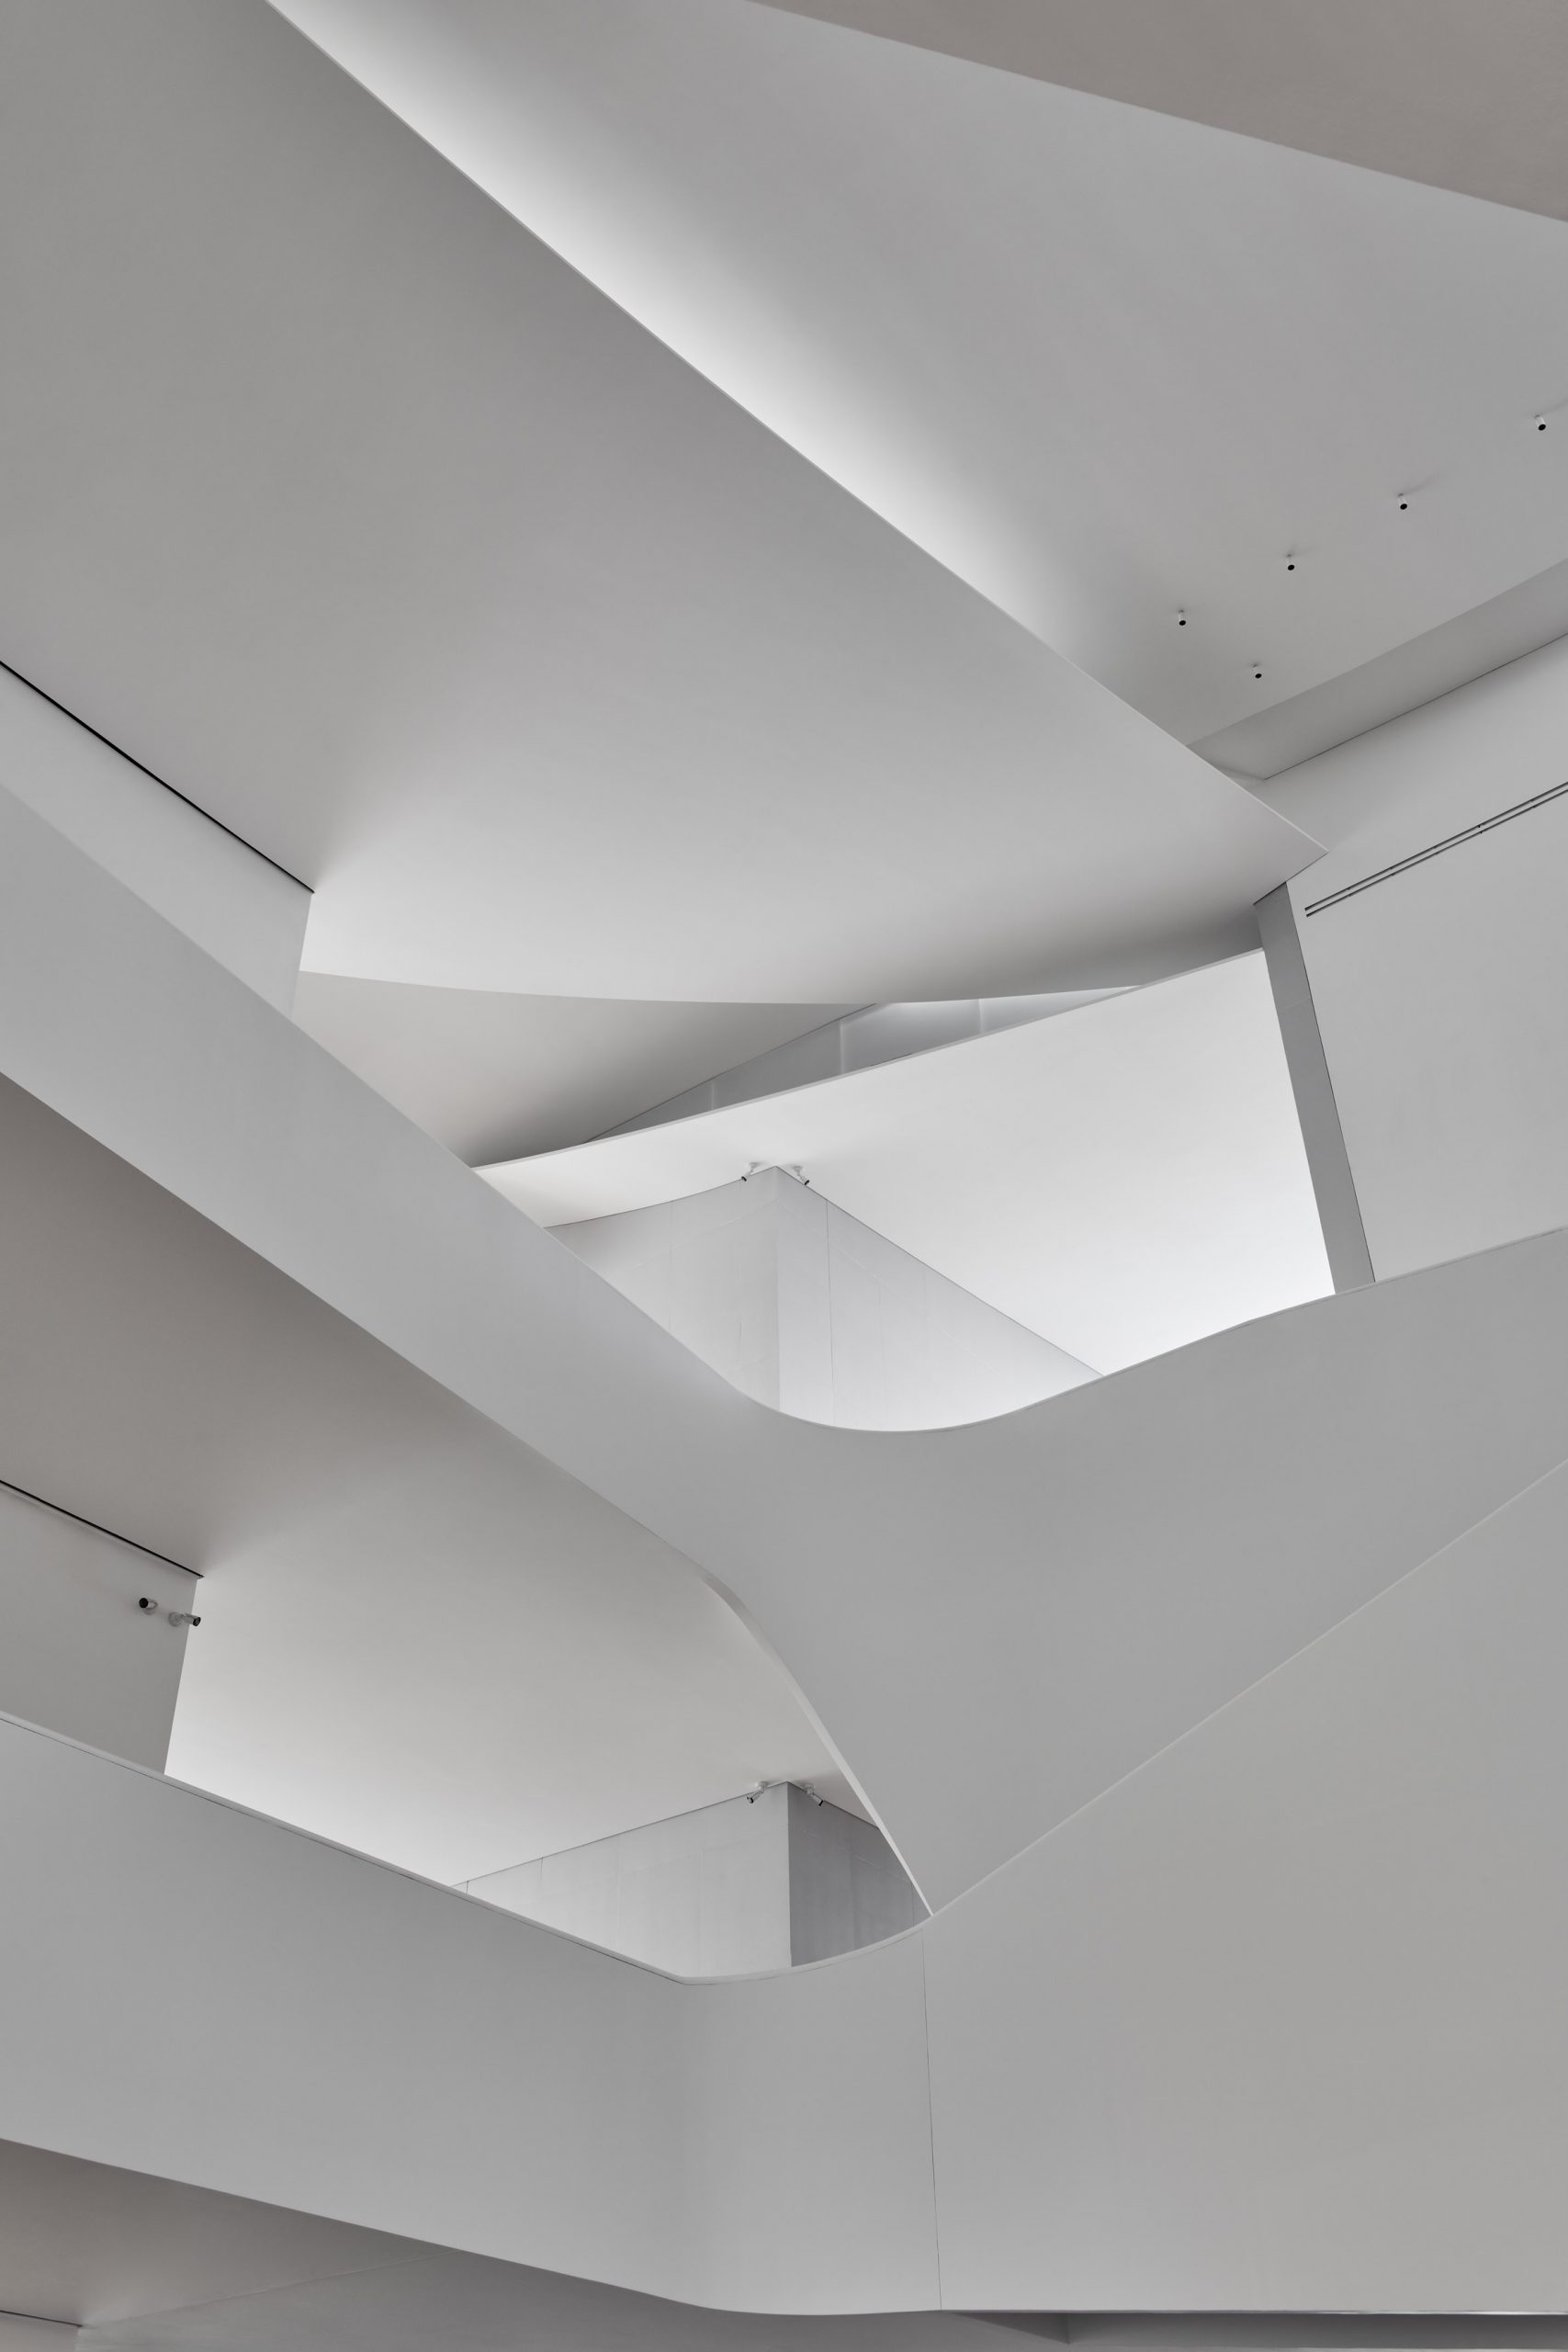 Roof detail in Nancy and Rich Kinder Building by Steven Holl Architects